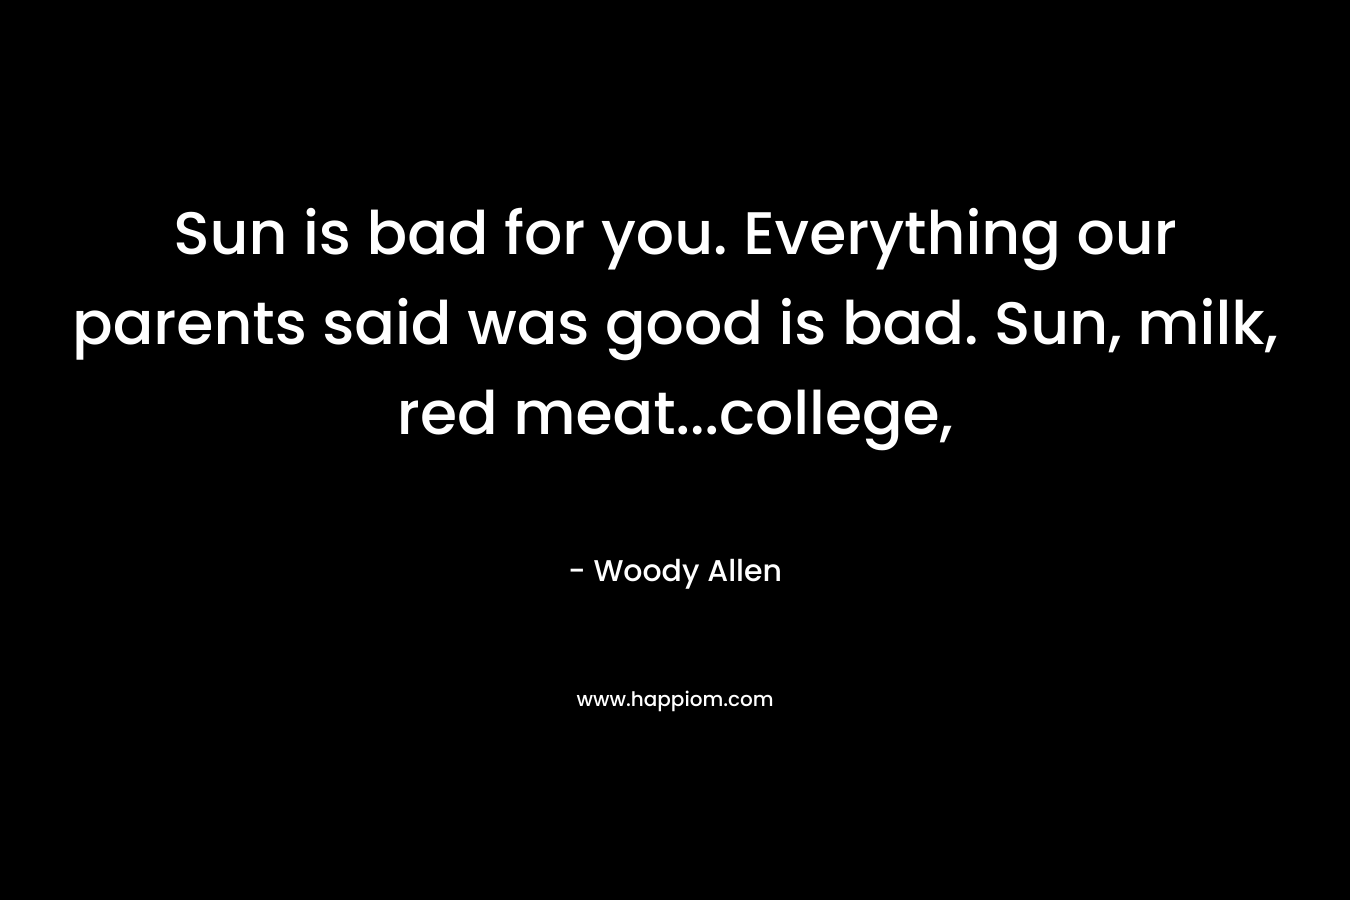 Sun is bad for you. Everything our parents said was good is bad. Sun, milk, red meat...college,